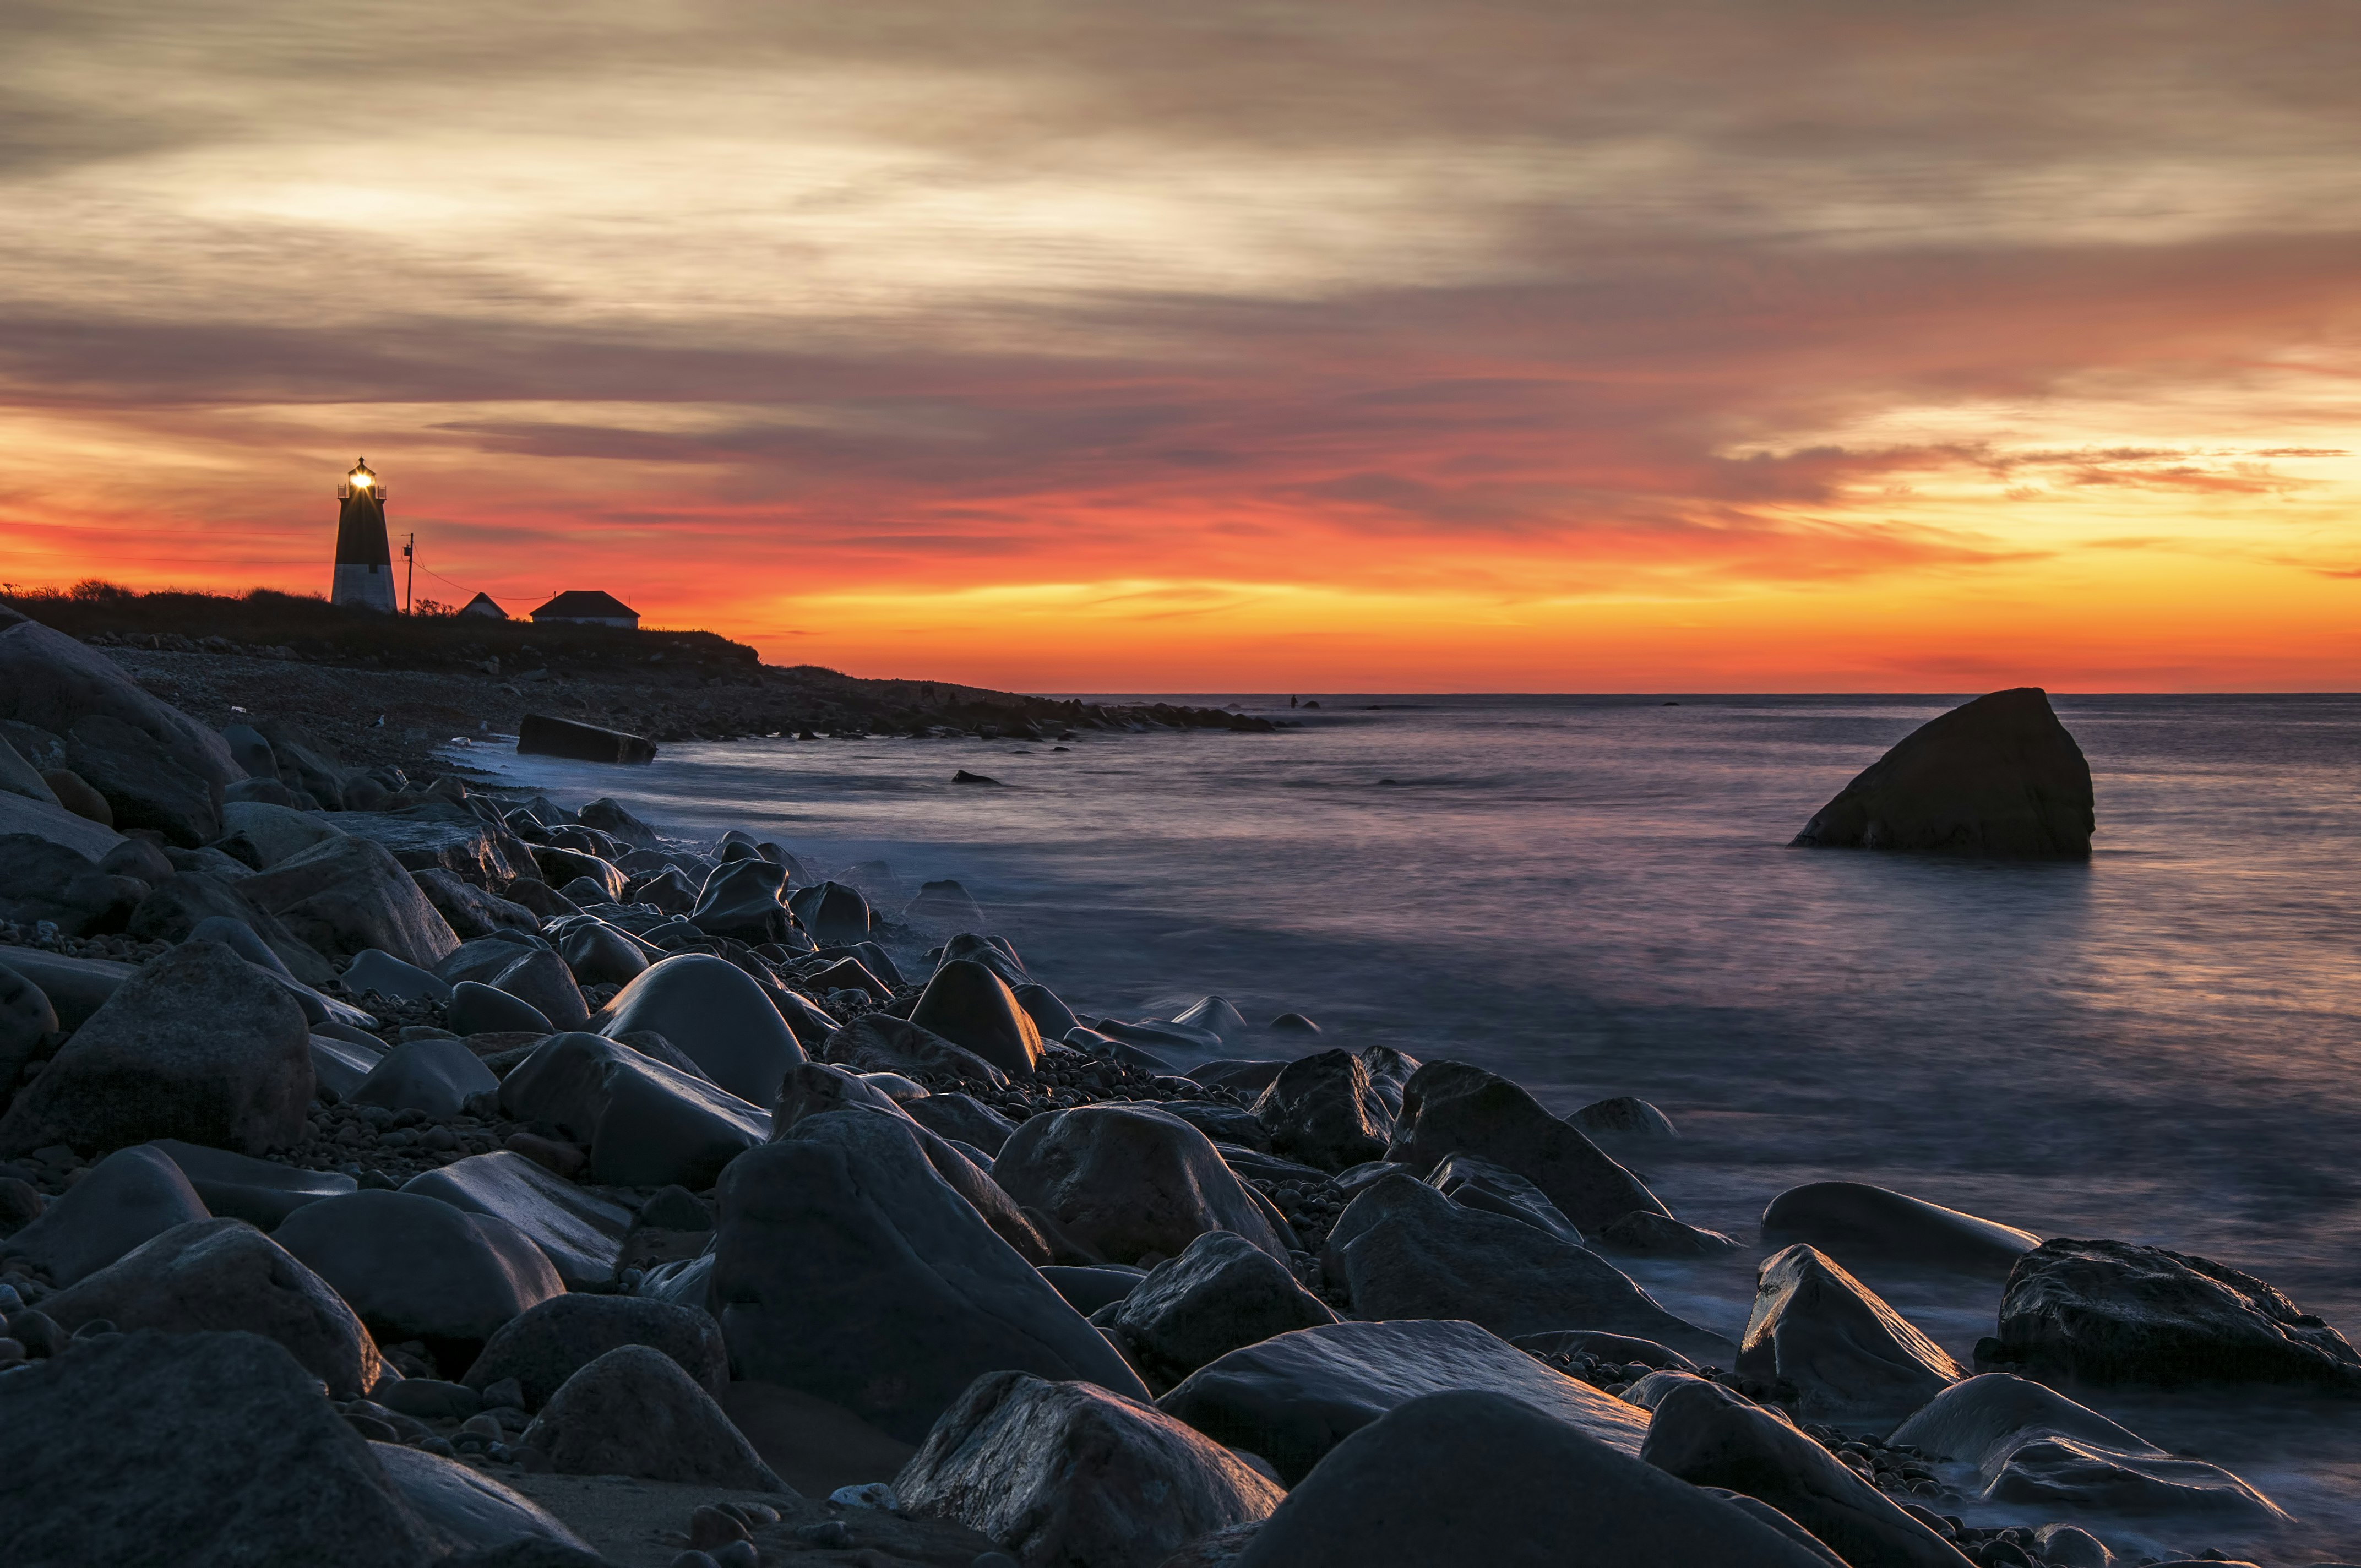 A long exposure of a lighthouse at sunrise, with wet rocks in the foreground